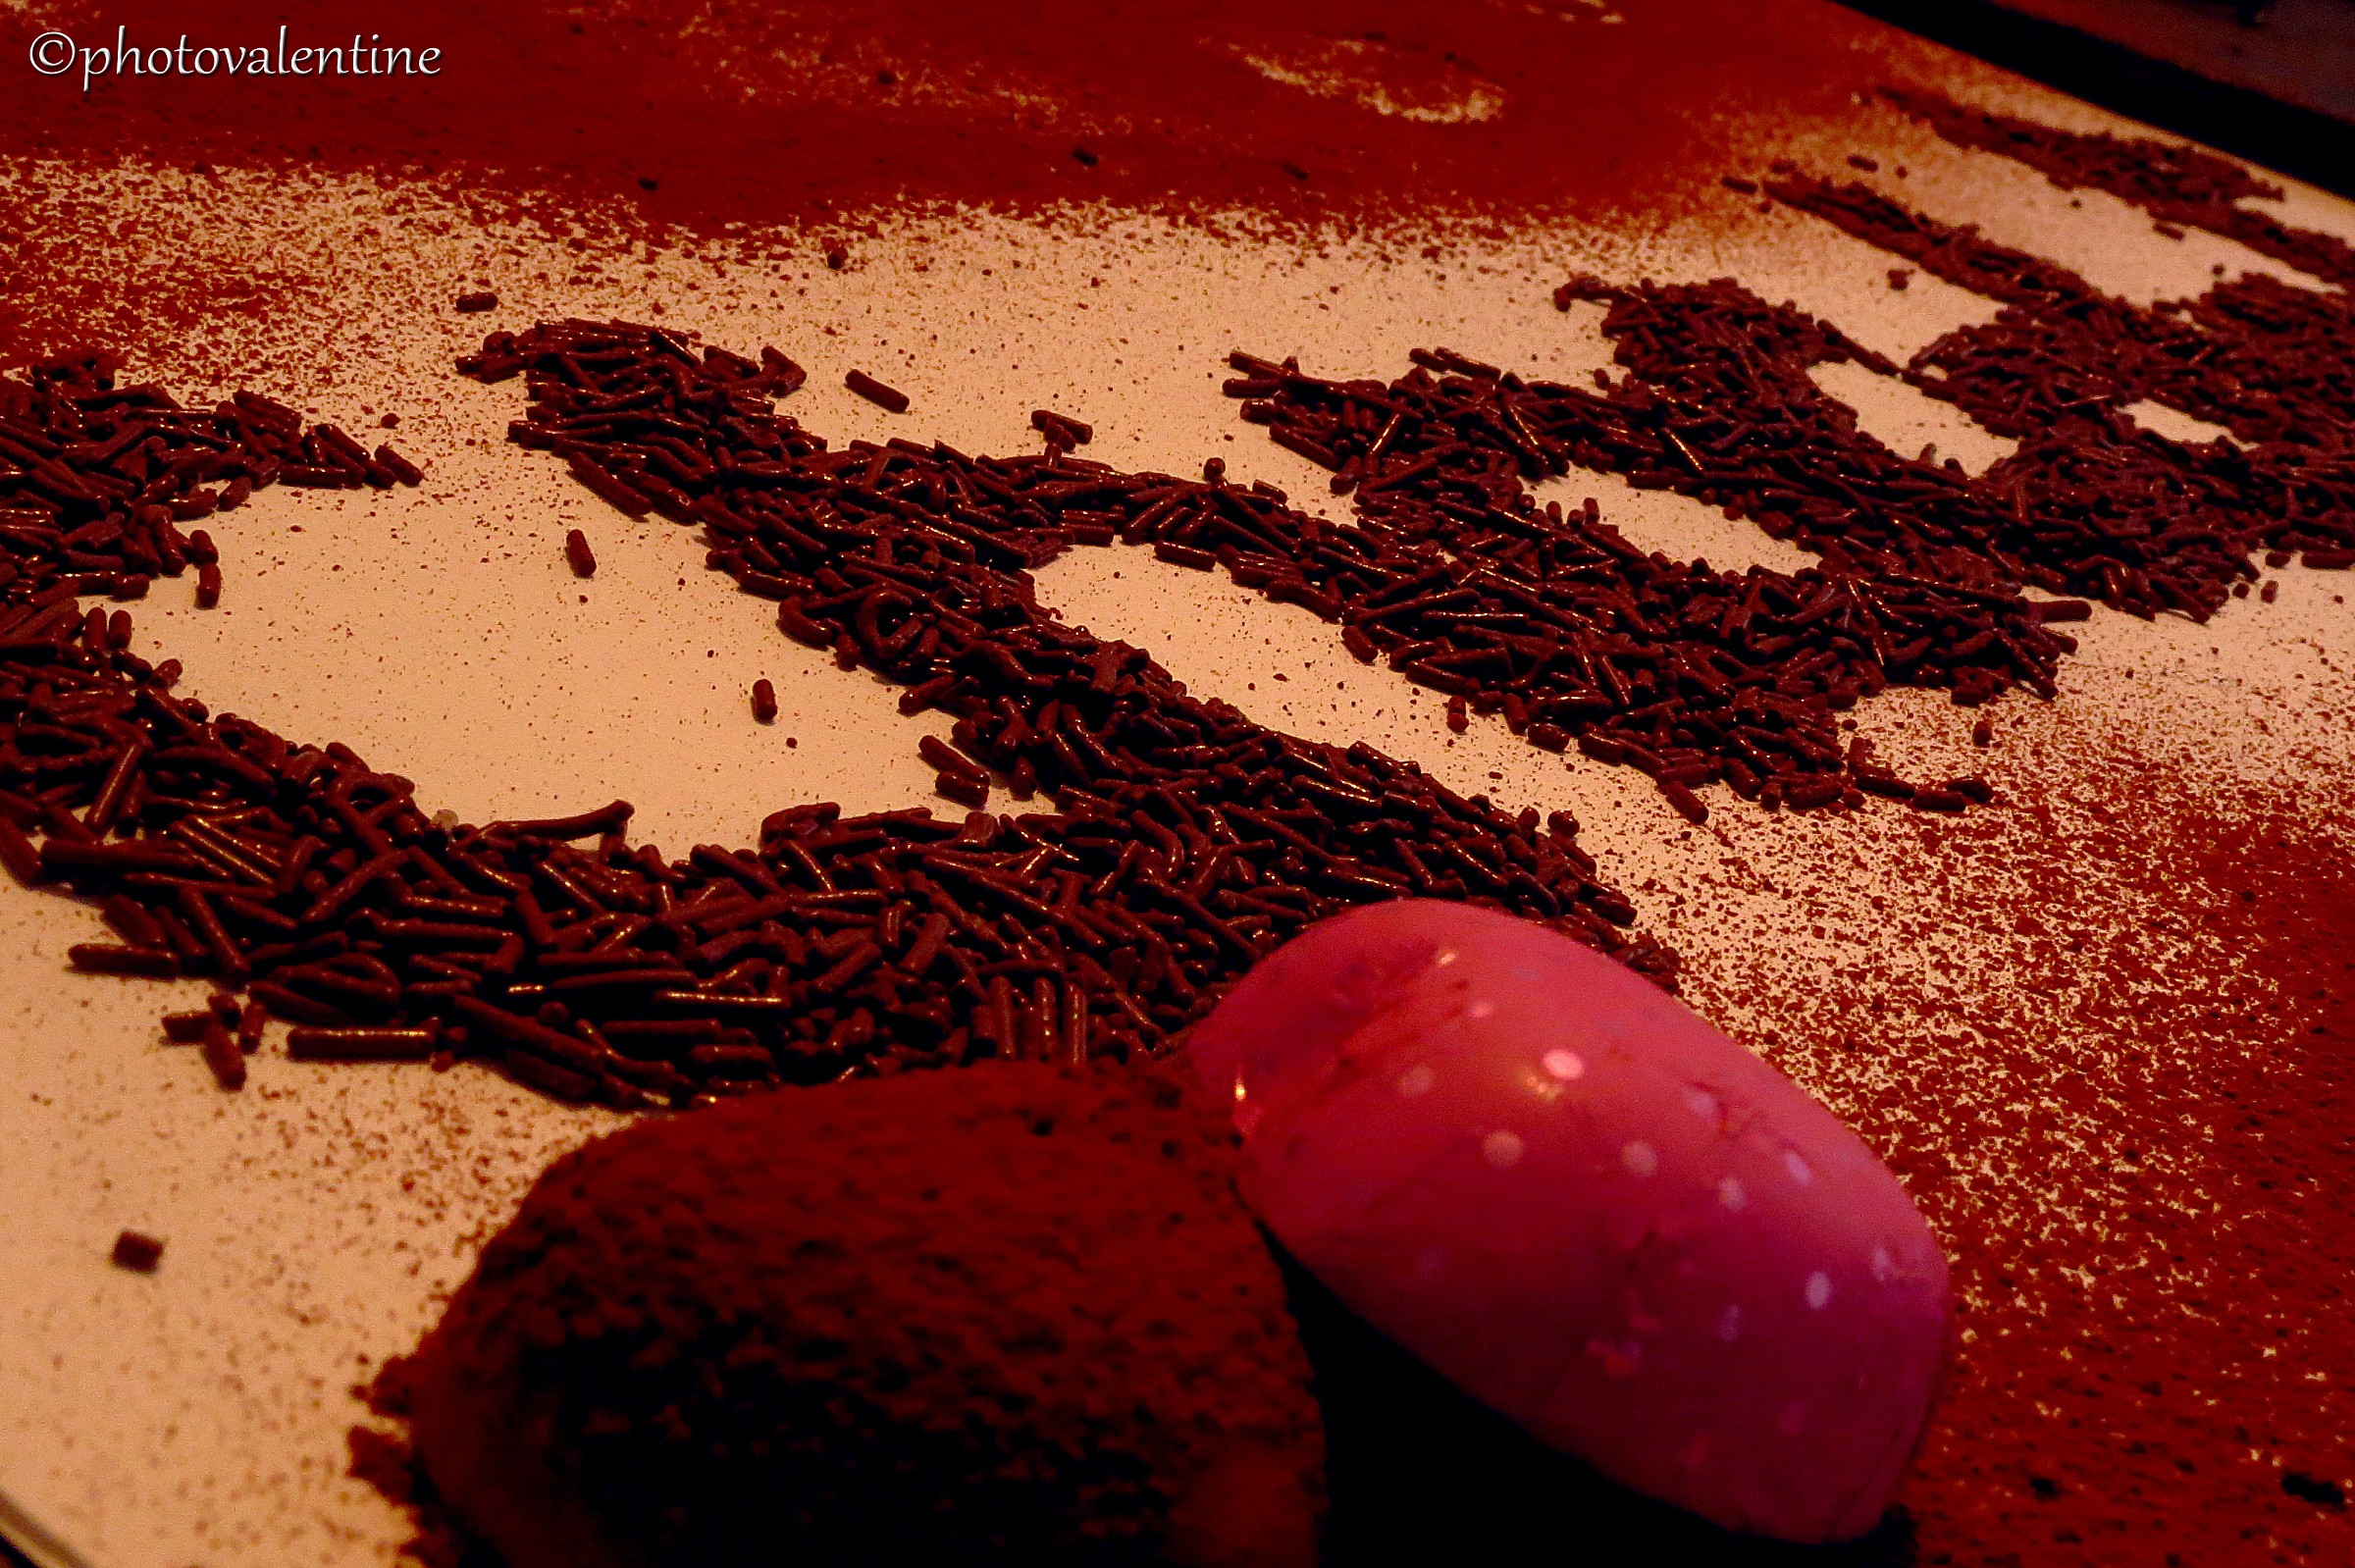 Two Hearts and Chocolat...